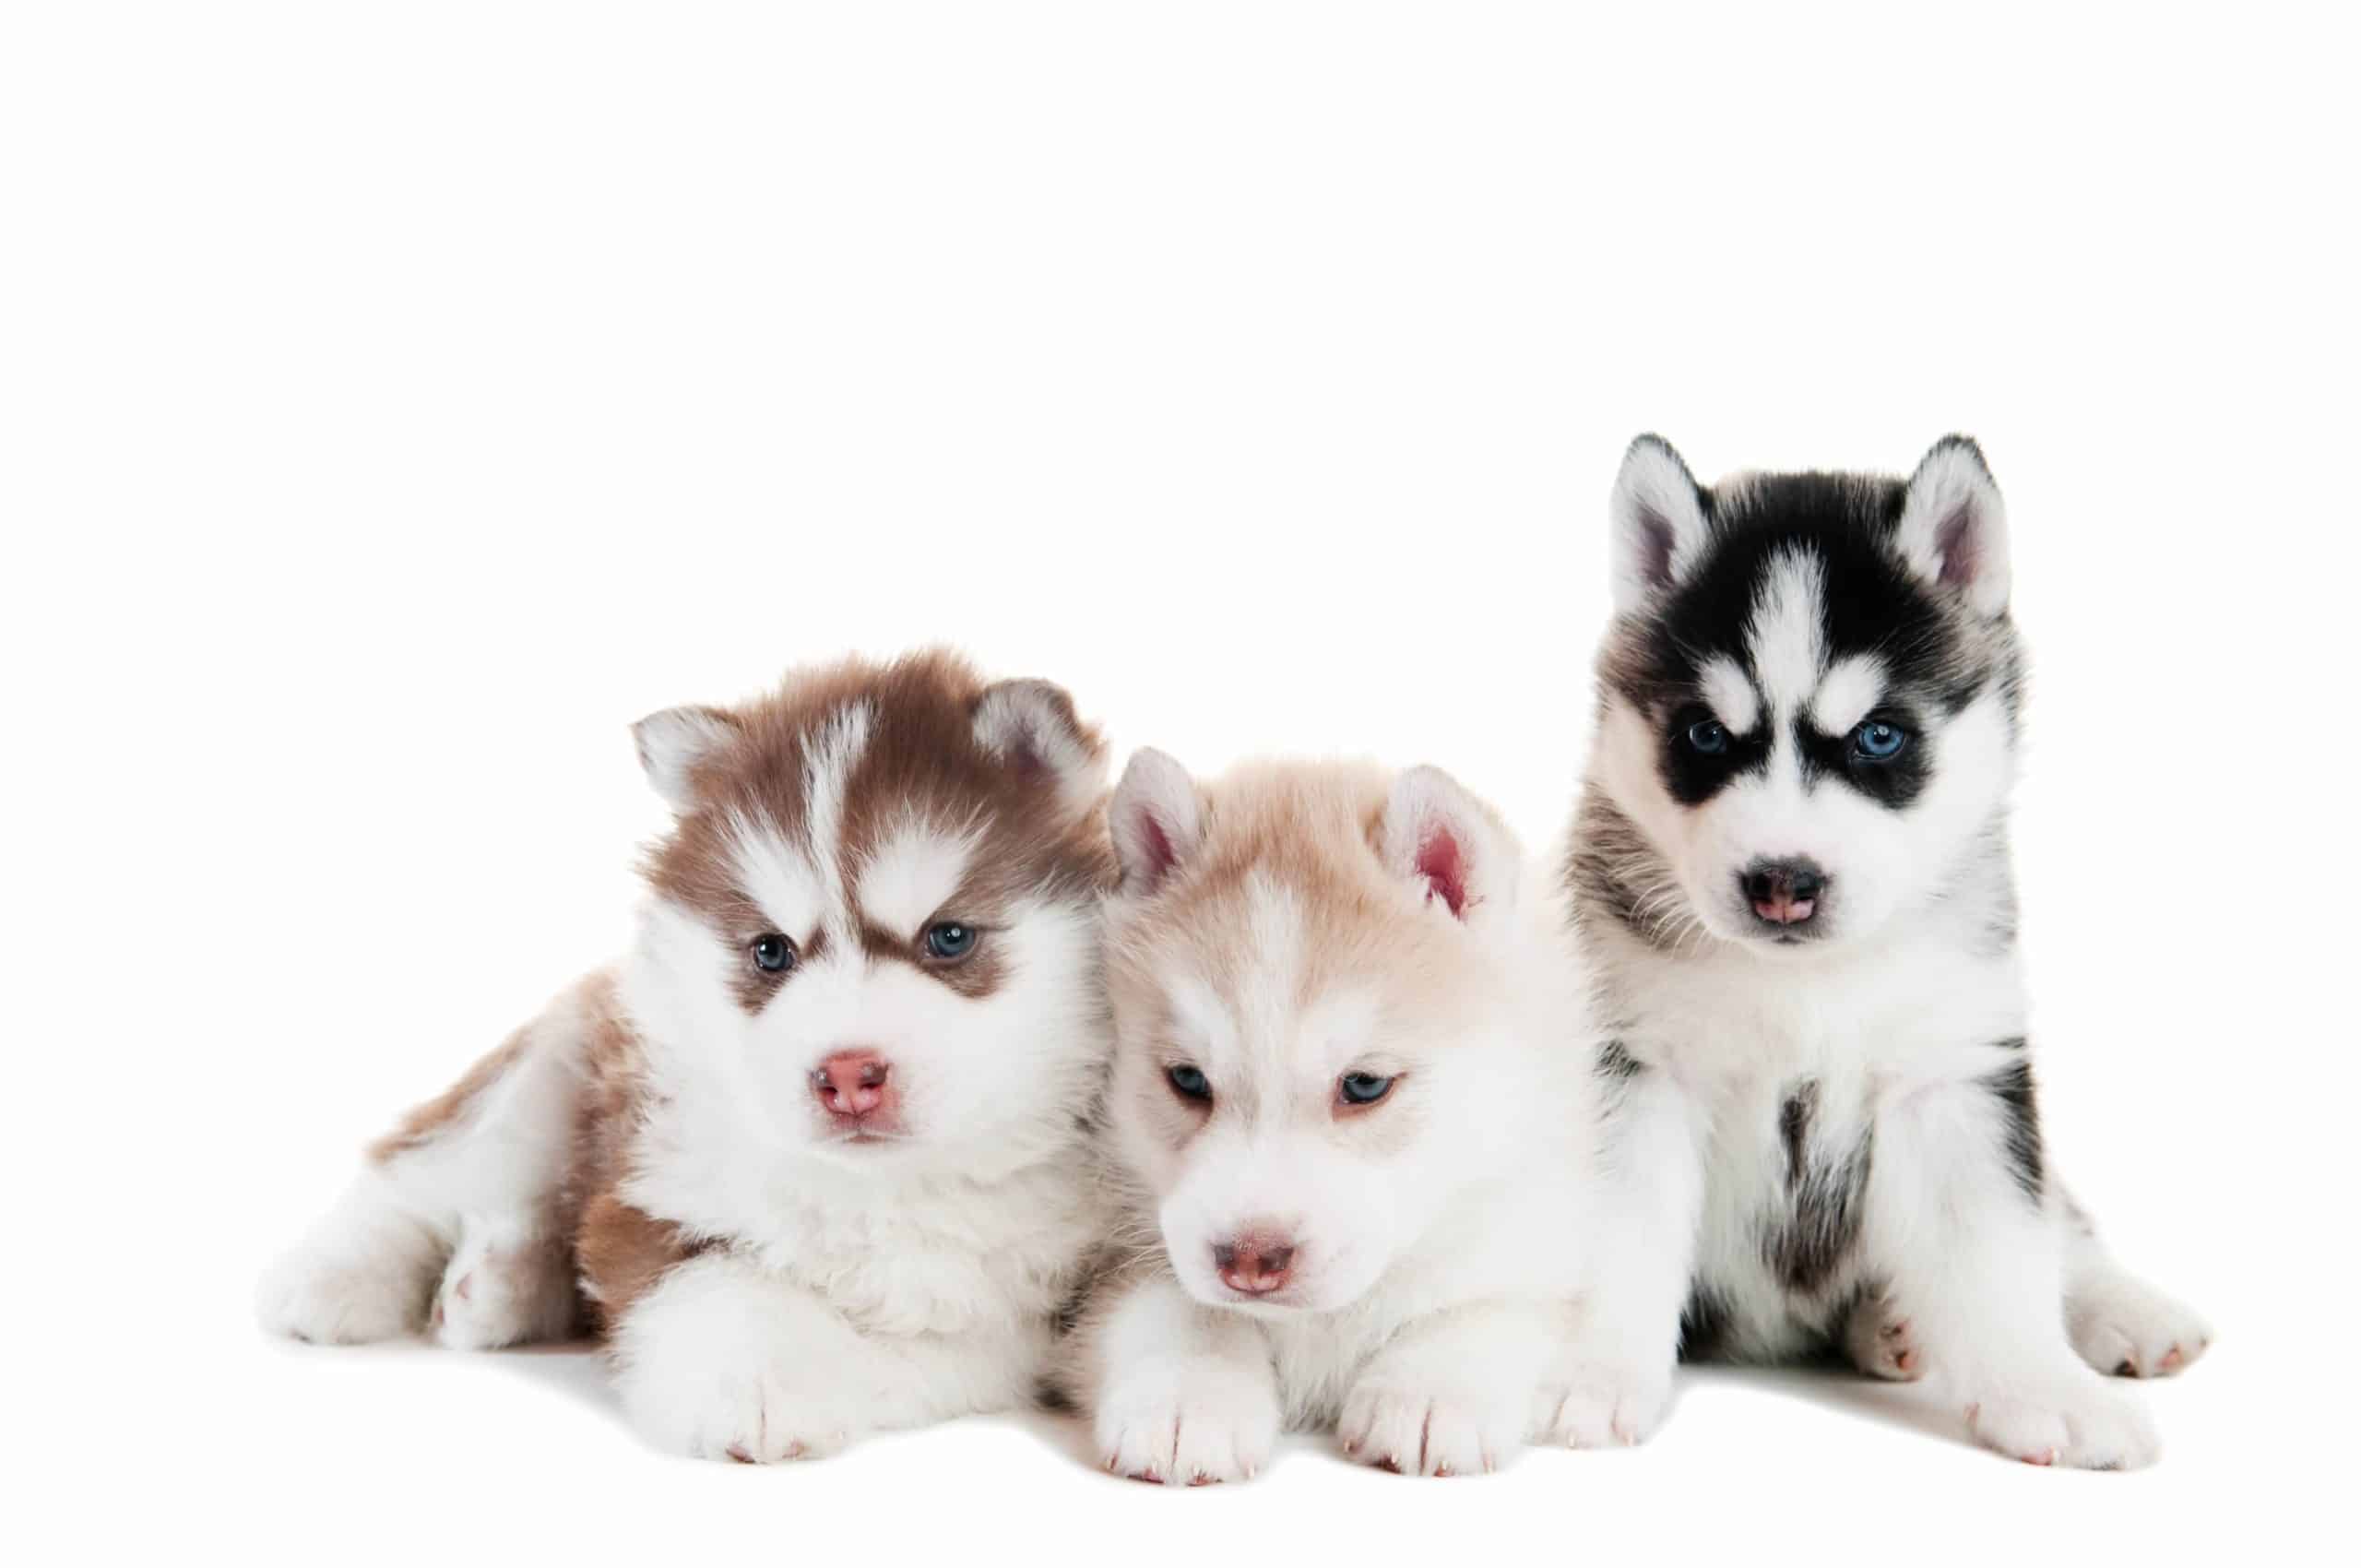 Siberian Husky puppies with different color coats. The Siberian is usually White, Black, Gray, Red, or Agouti. Simultaneously, the Alaskan can come in all these colors but can also be all black or all white.